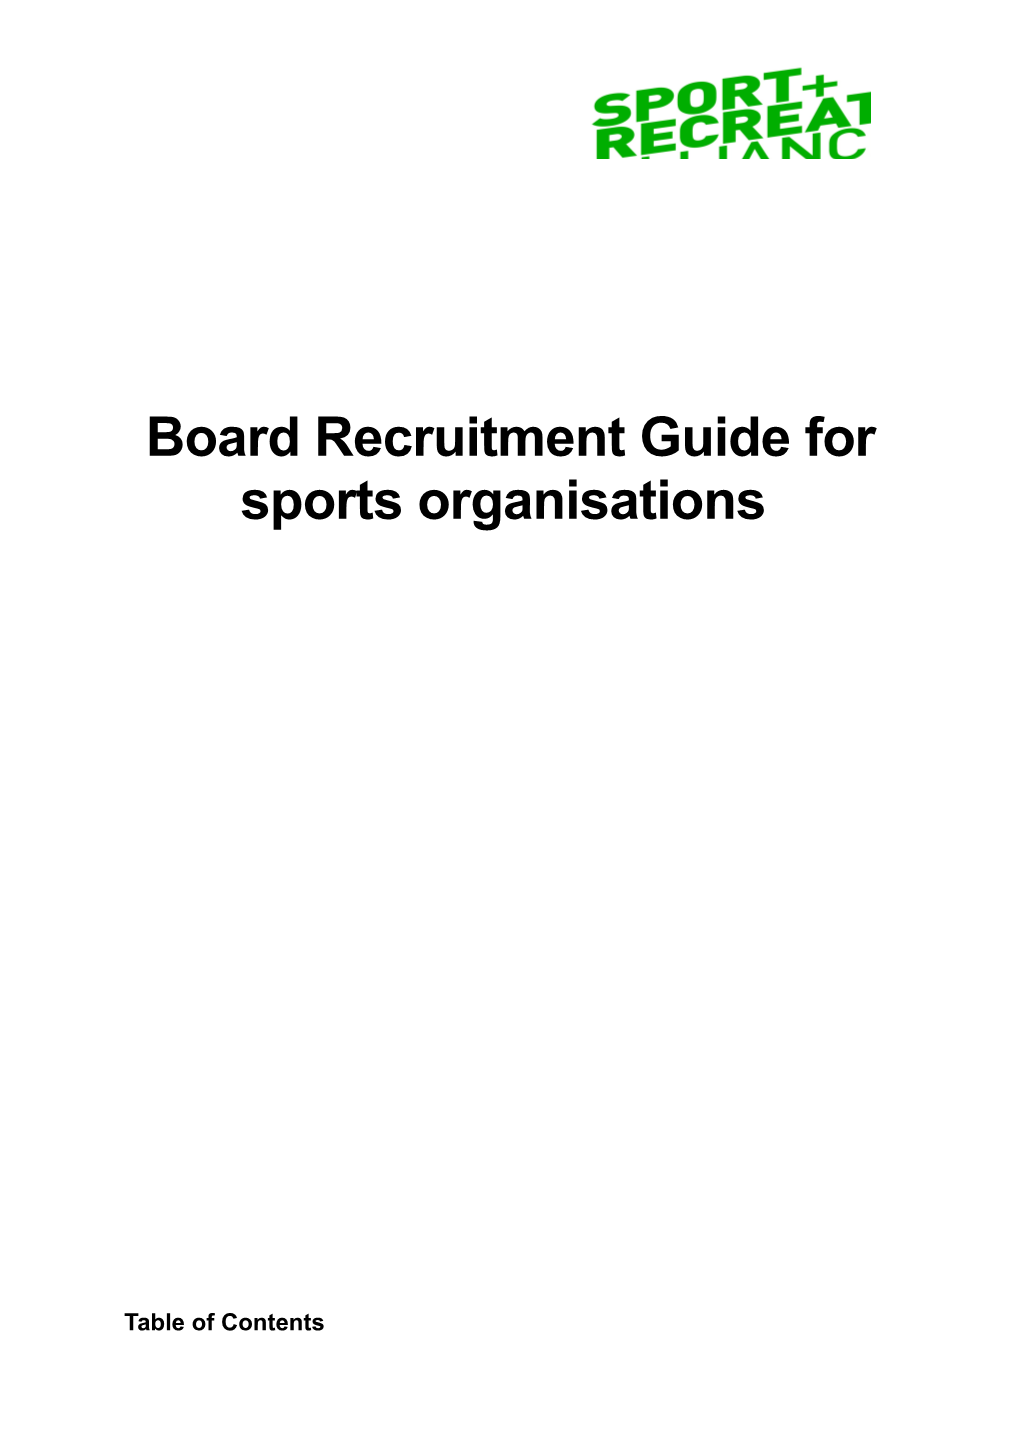 Board Recruitment Guide for Sports Organisations